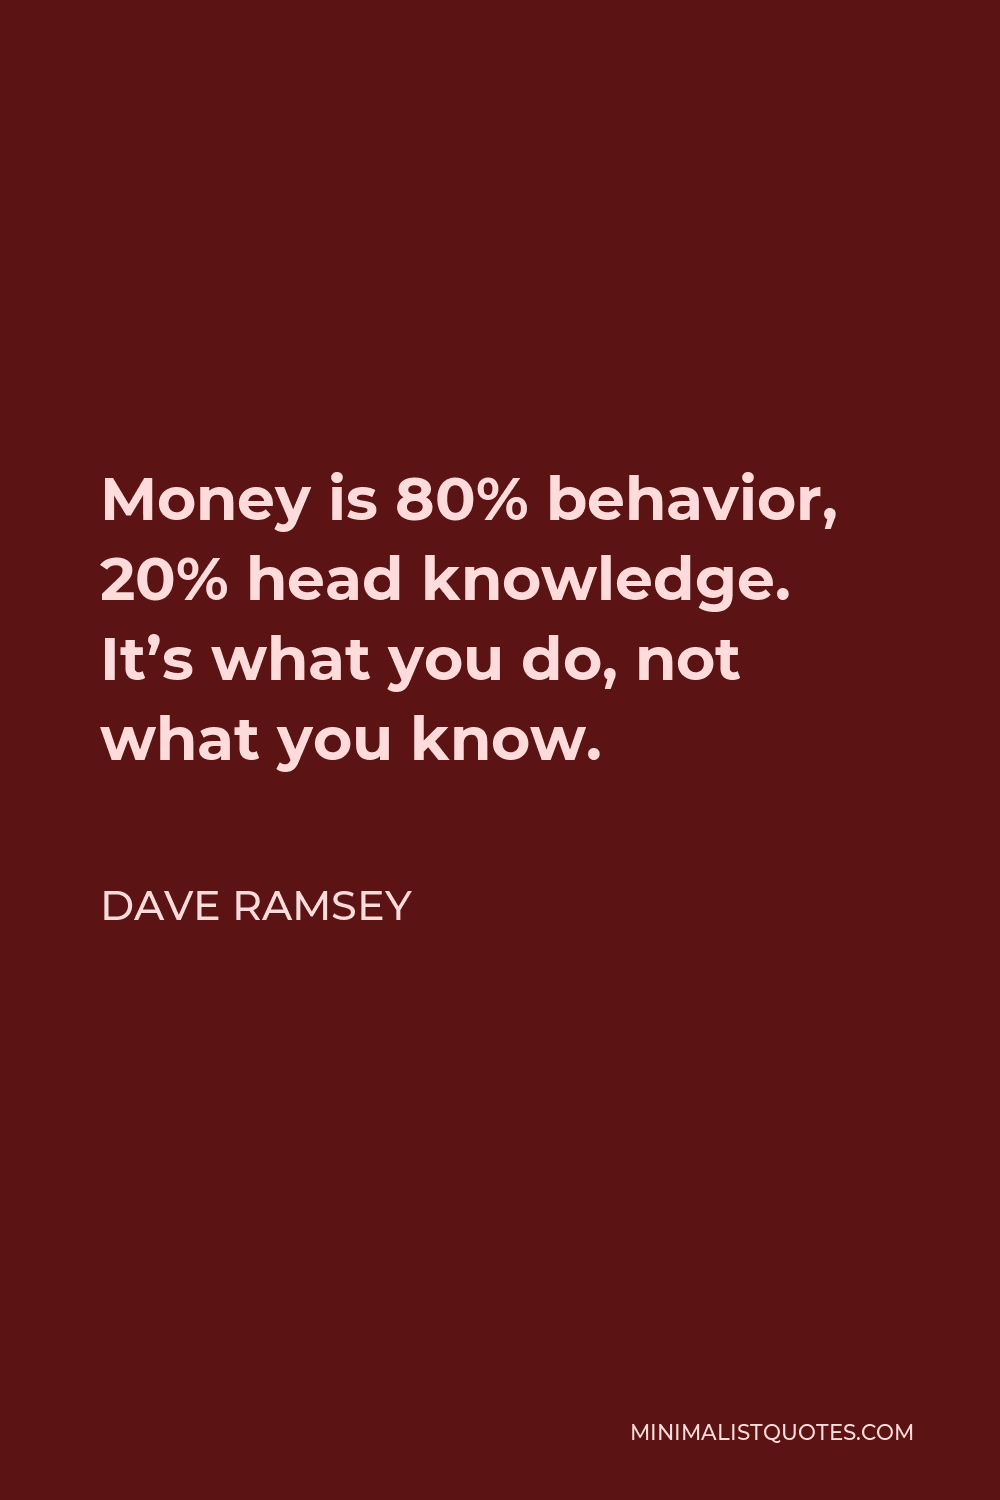 Dave Ramsey Quote - Money is 80% behavior, 20% head knowledge. It’s what you do, not what you know.